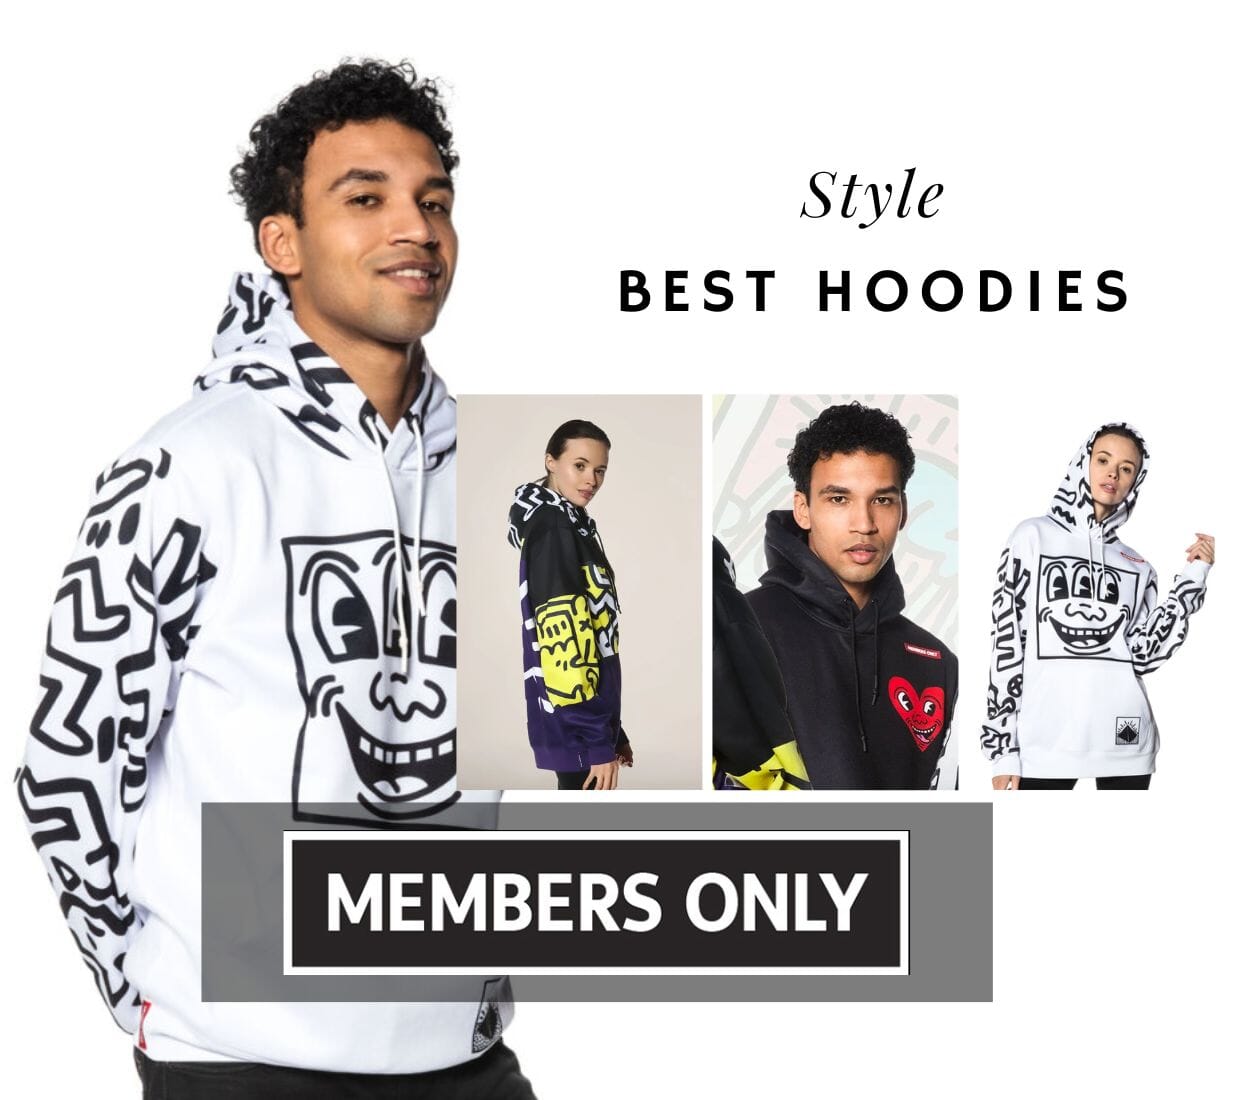 How to Wear a Hoodie With Style?